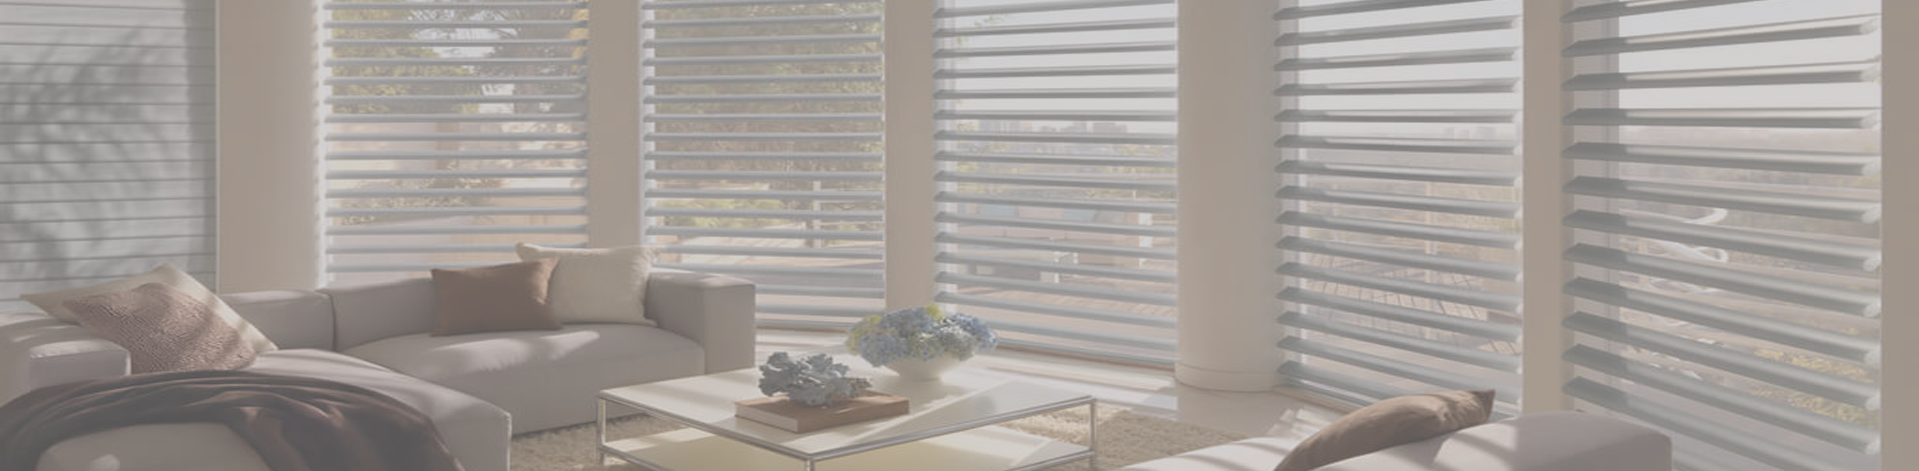 open custom blinds in a living area